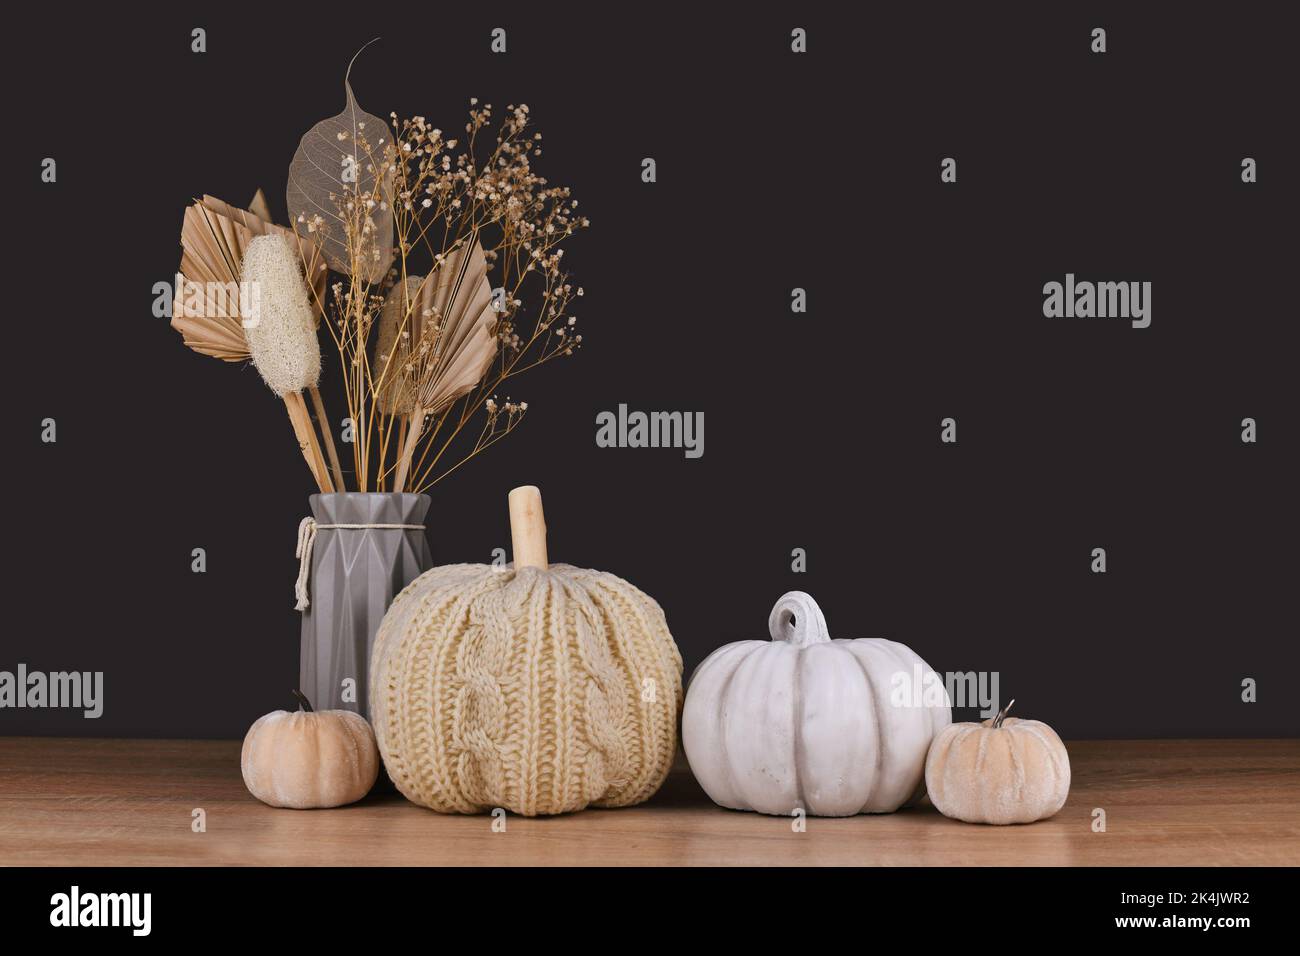 Fall decoration with boho style knitted beige pumpkin and gray stone pumpkin on dark backgroun Stock Photo